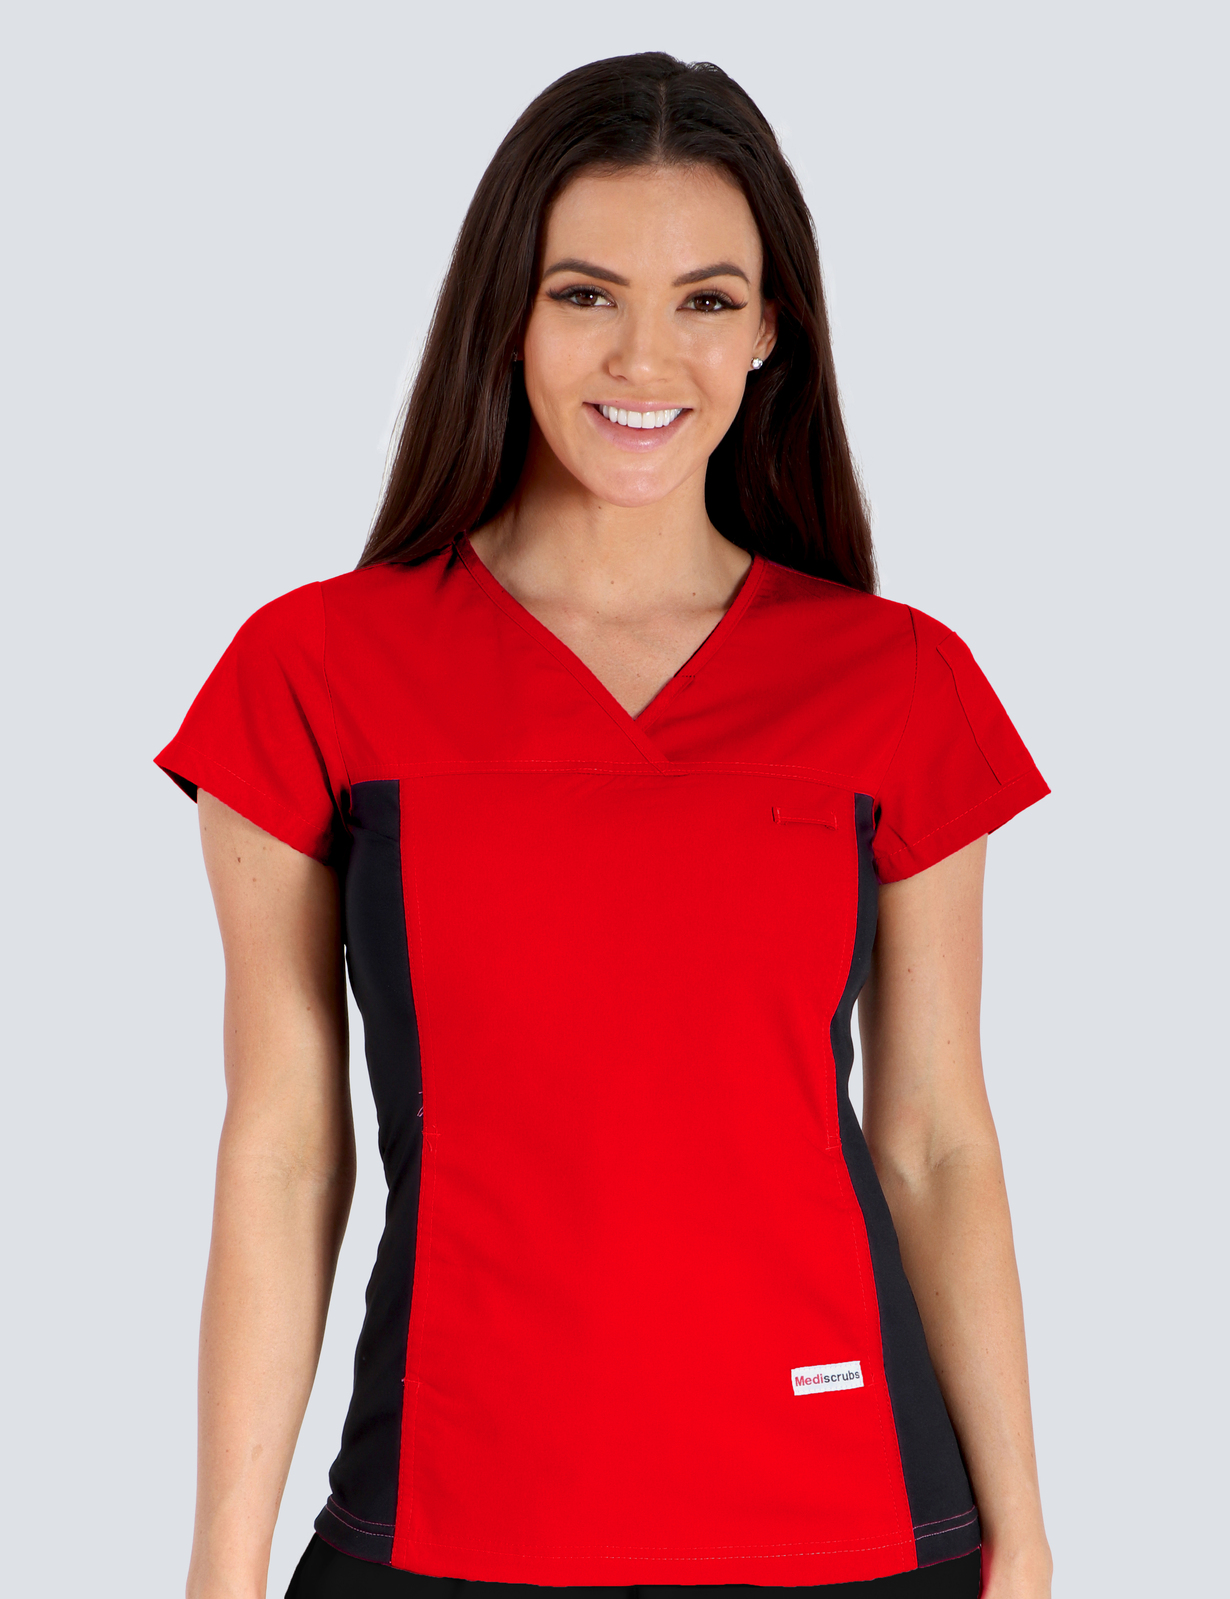 Prince Charles Hospital - Medical Imaging (Women's Fit Solid Top and Cargo  Pants in Black incl Logos)